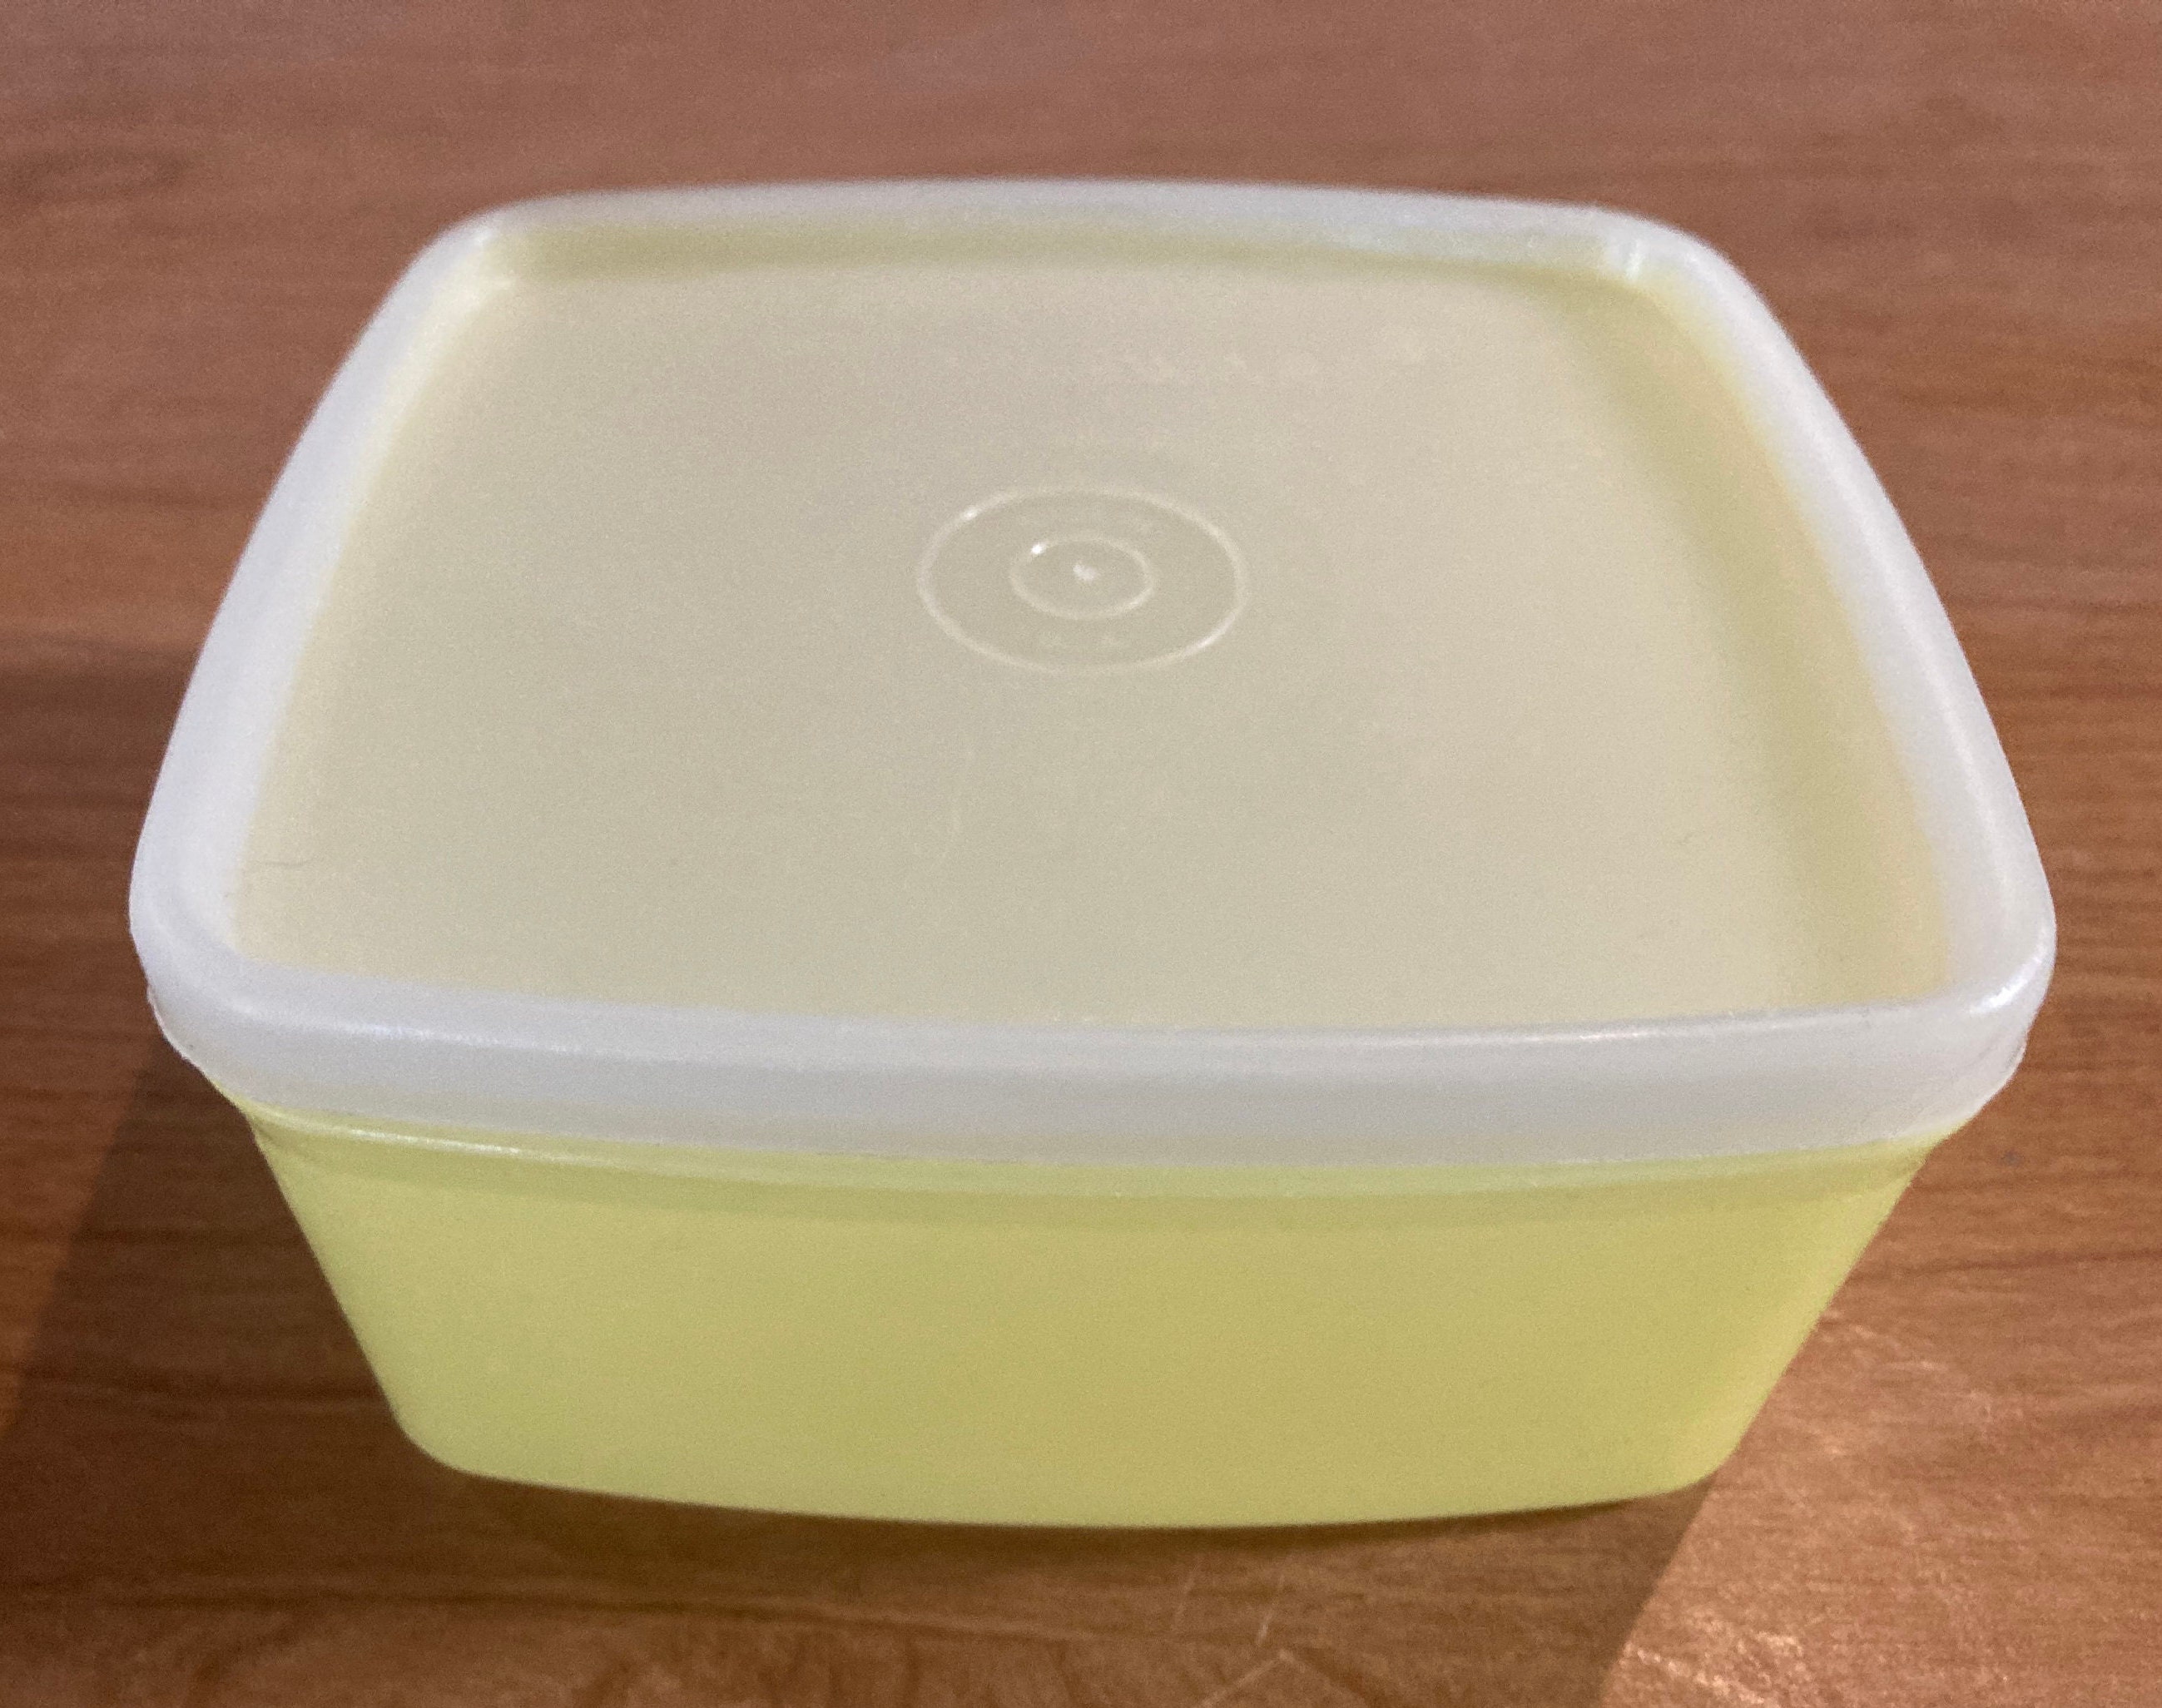 💲 Vintage Tupperware 311 Square Freezer Containers Lot of 5 w/ 1 lid 310